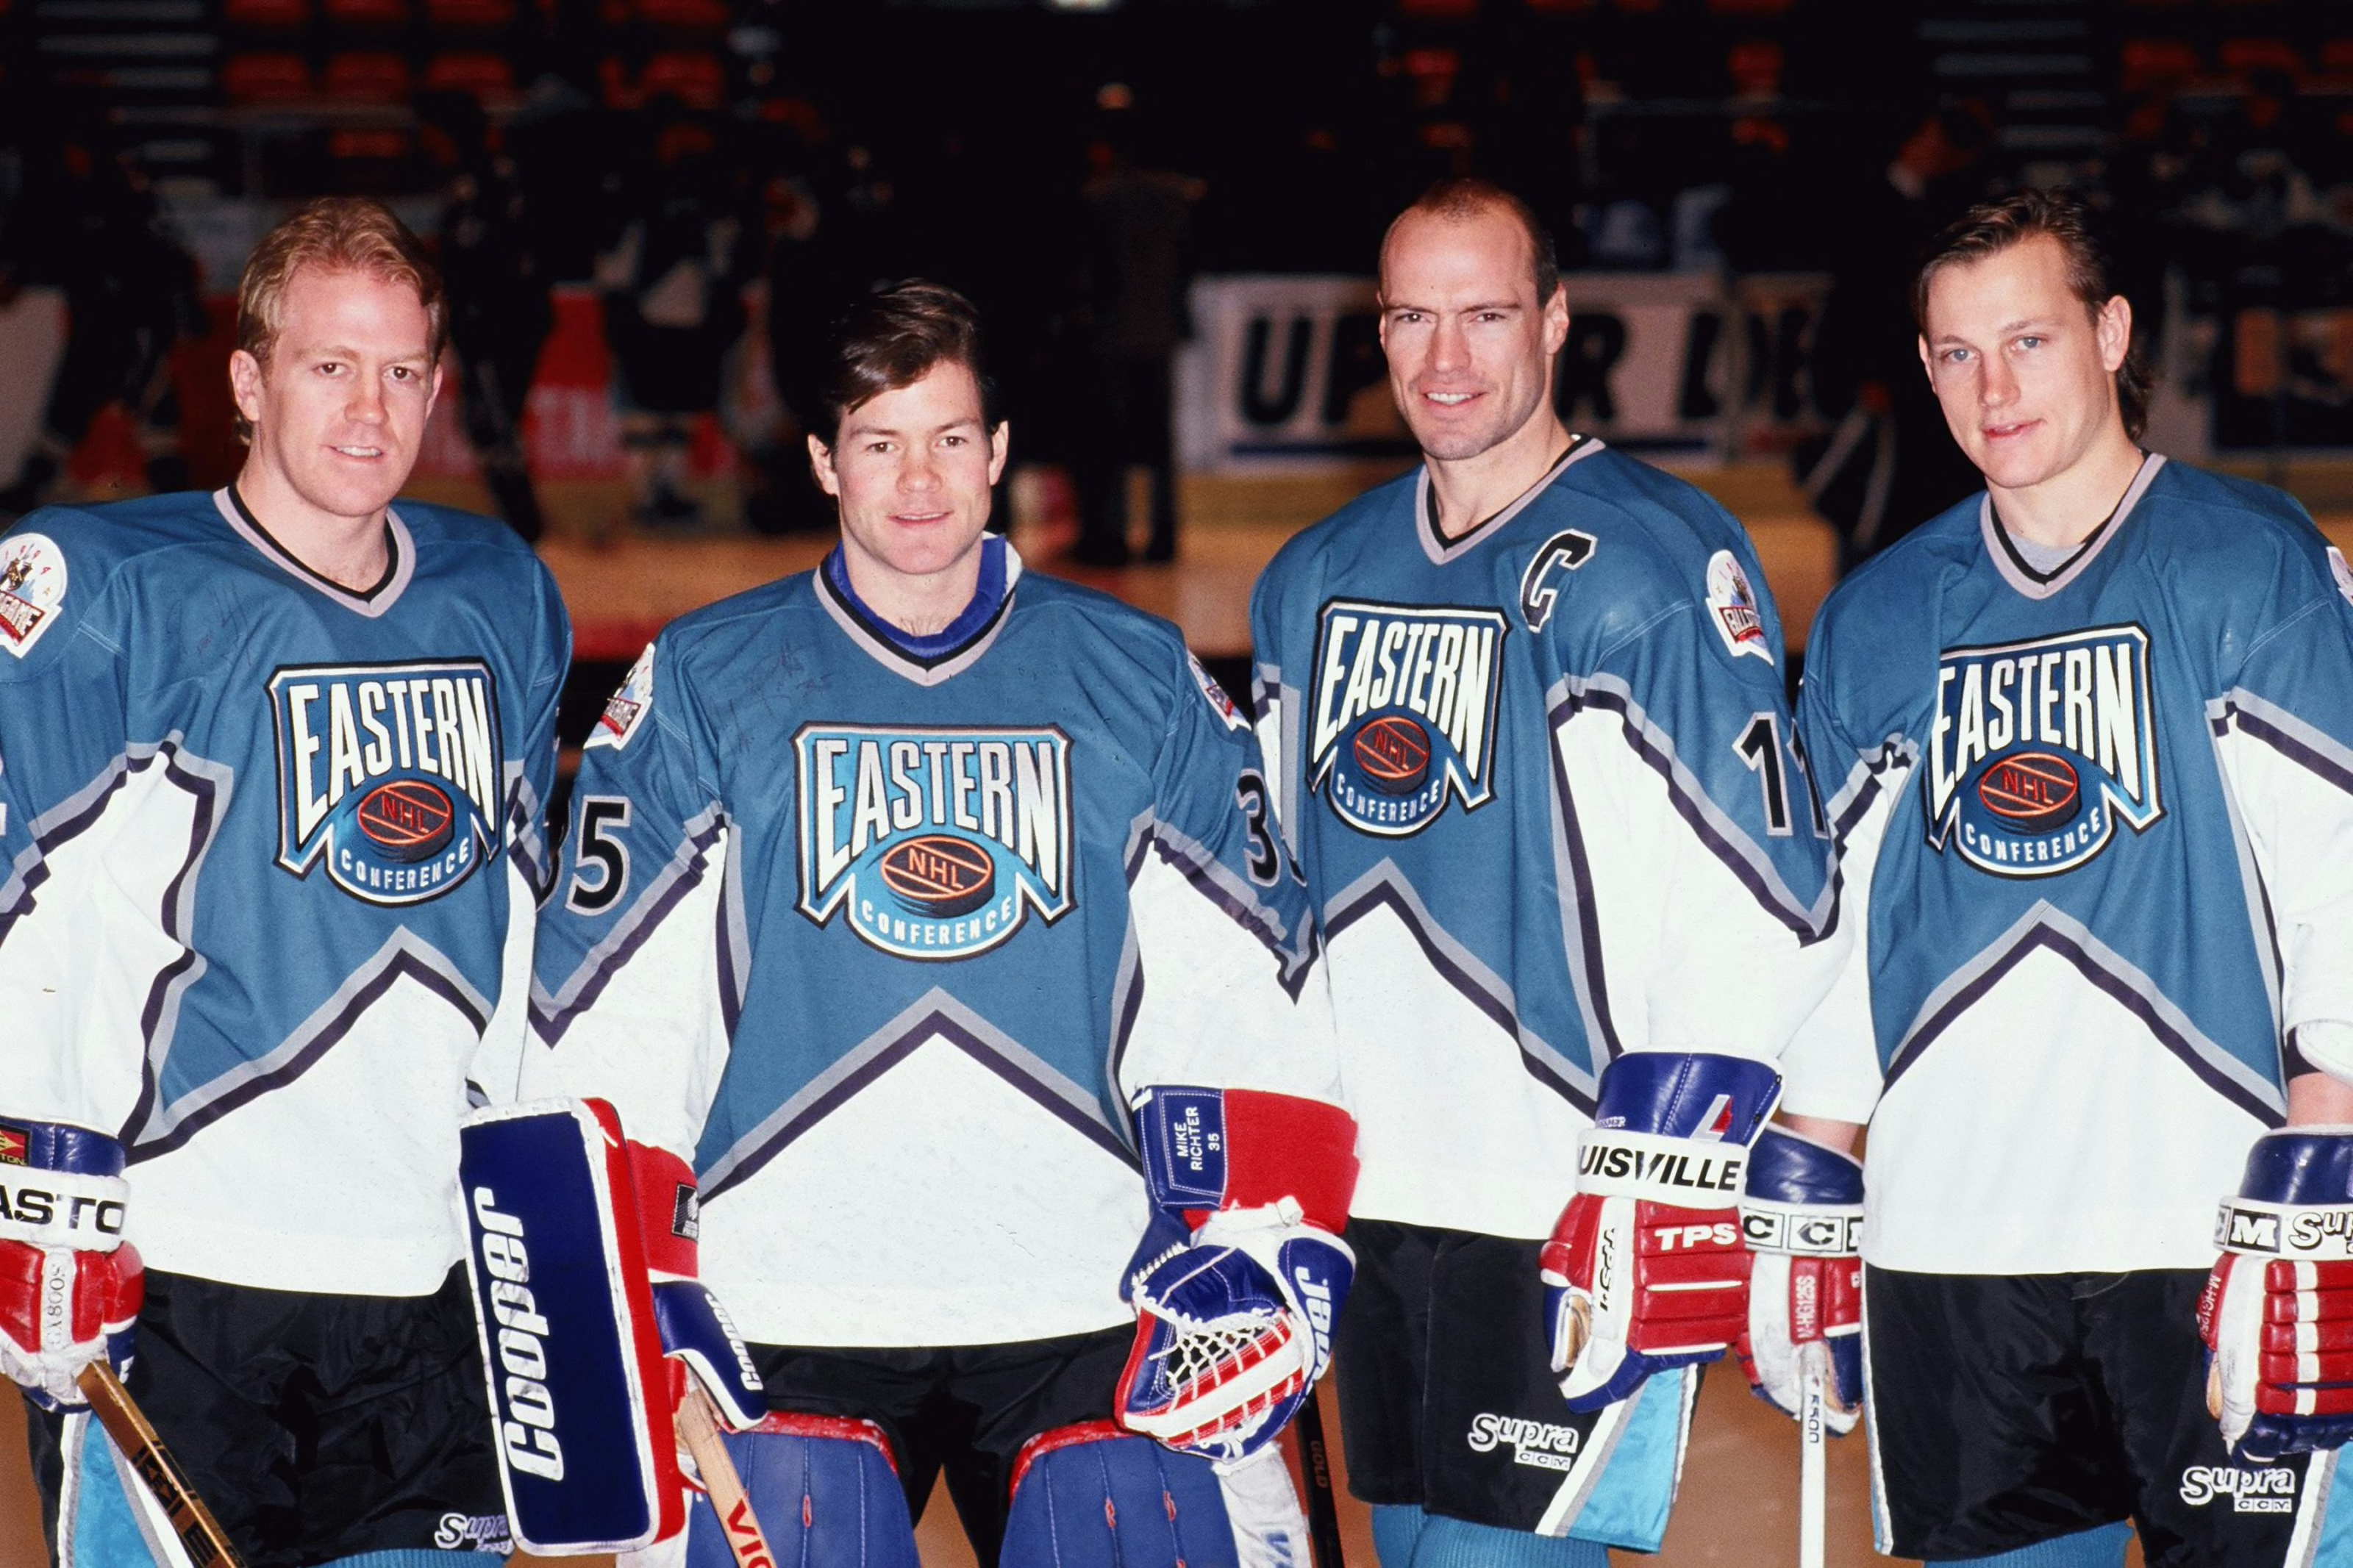 The 'Core 4' 1994 NY Rangers are Coming to Freehold